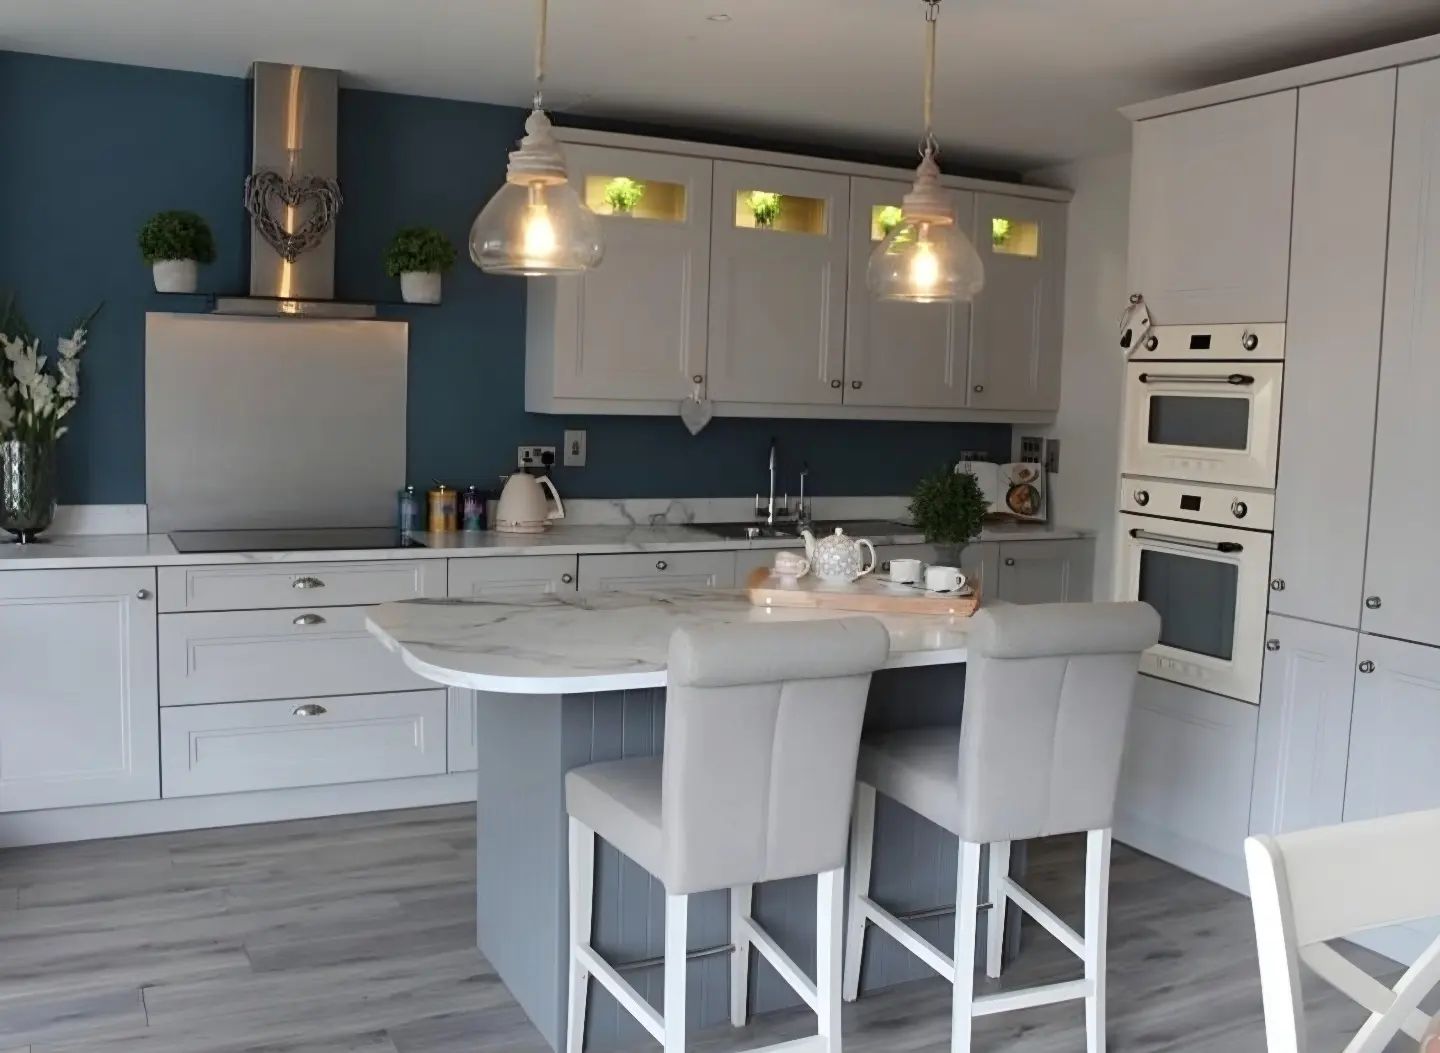 This stunning kitchen by Stephanie
Daly @interiorsx2 uses 🎨 Victorian Eclectic 15 from the
@crownpaintsireland Historic Colour Collection on
the walls to absolutely beautiful effect.